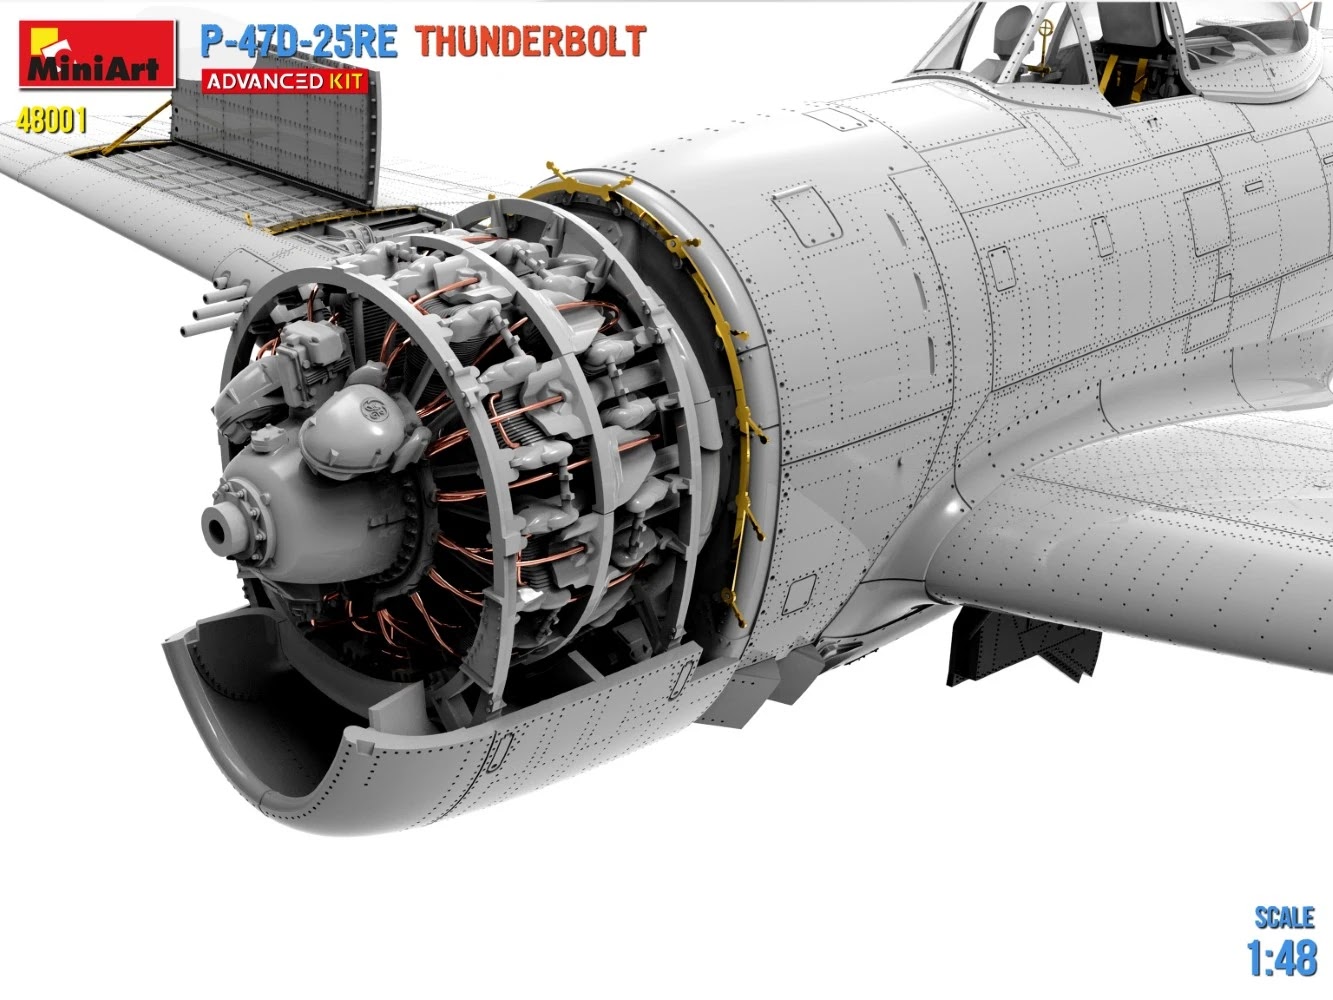 MiniArt ups the detail on their P-47D CAD Engine Detail